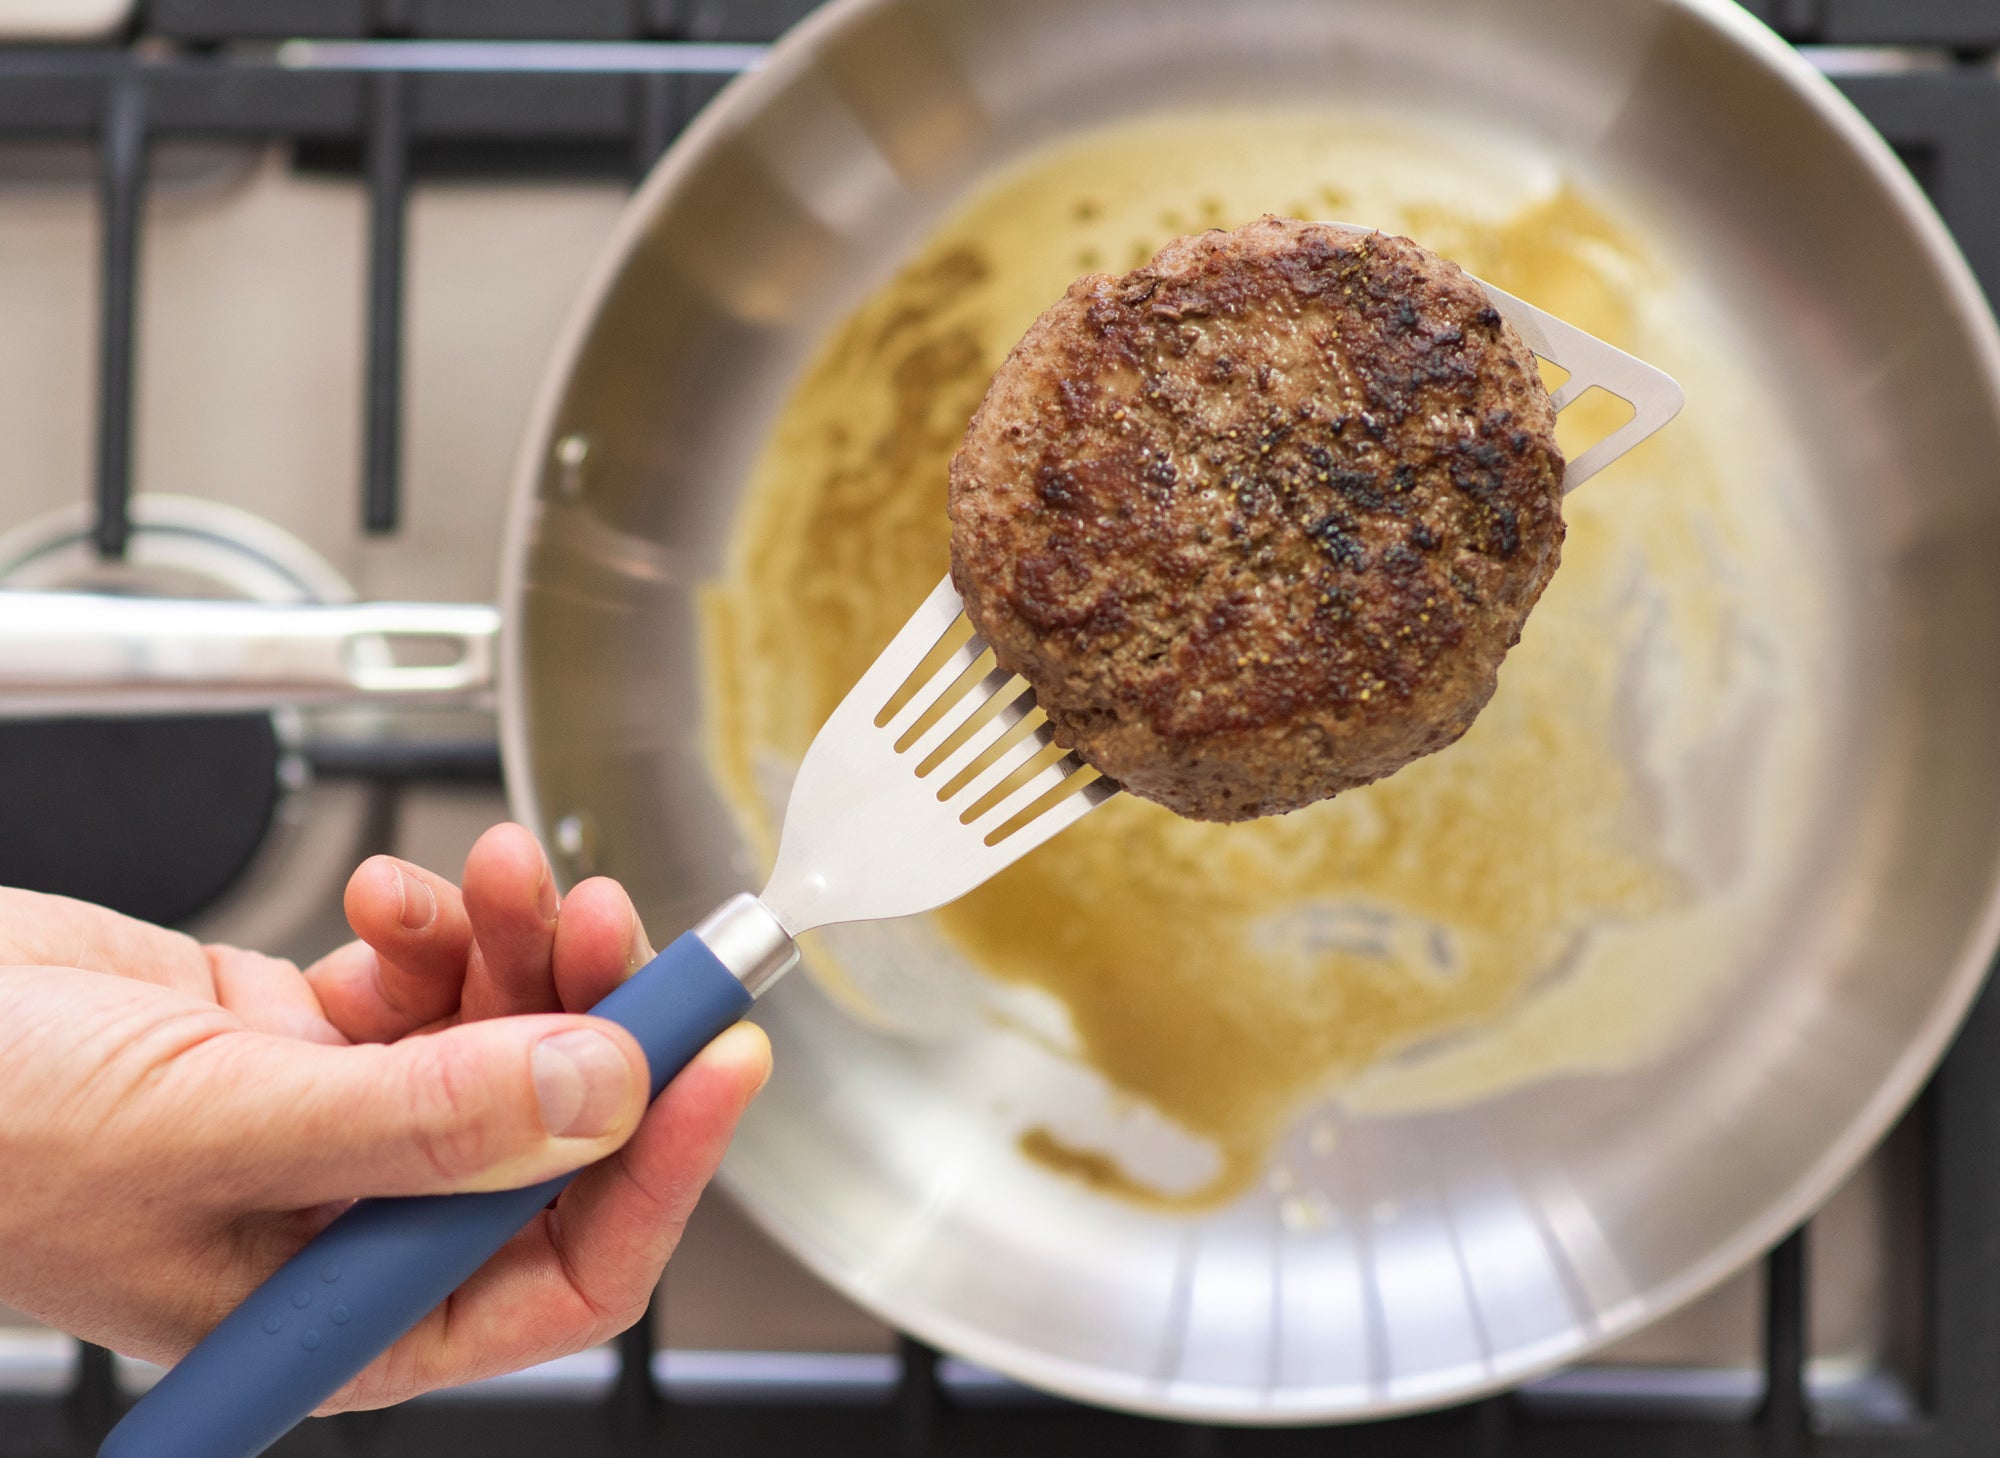 A Misen Metal Fish Spatula with blue silicone handle lifting a cooked hamburger patty above a stainless steel skillet.